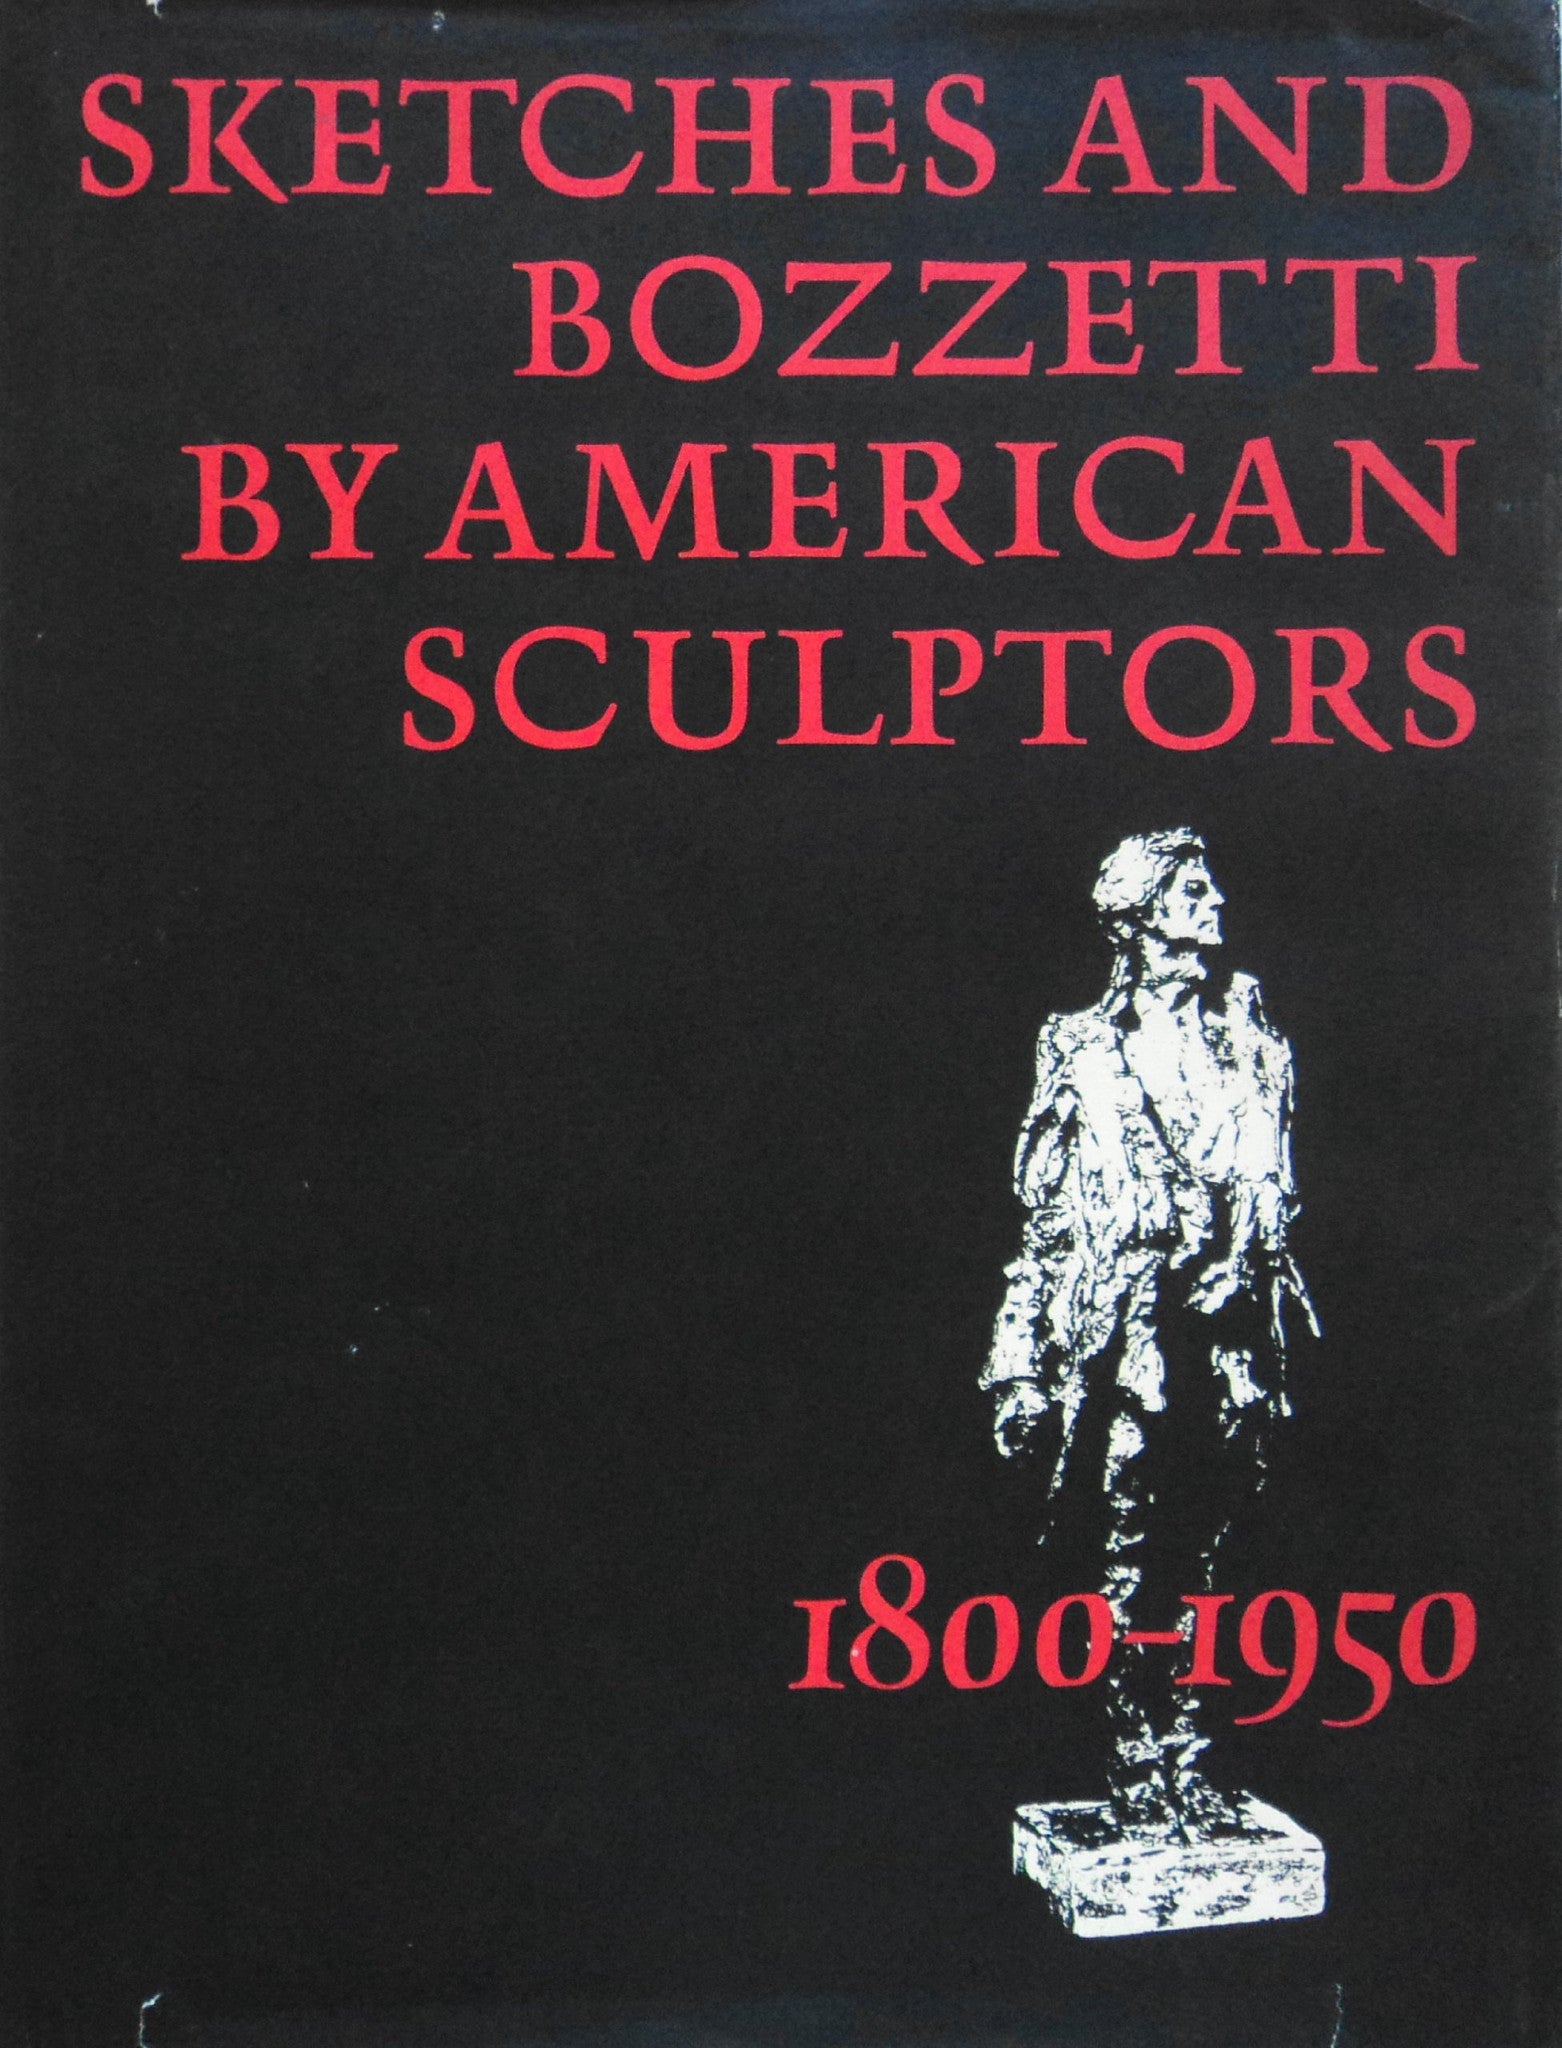 Sketches and Bozzetti by American Sculptors, 1880-1950 (Hardcover)